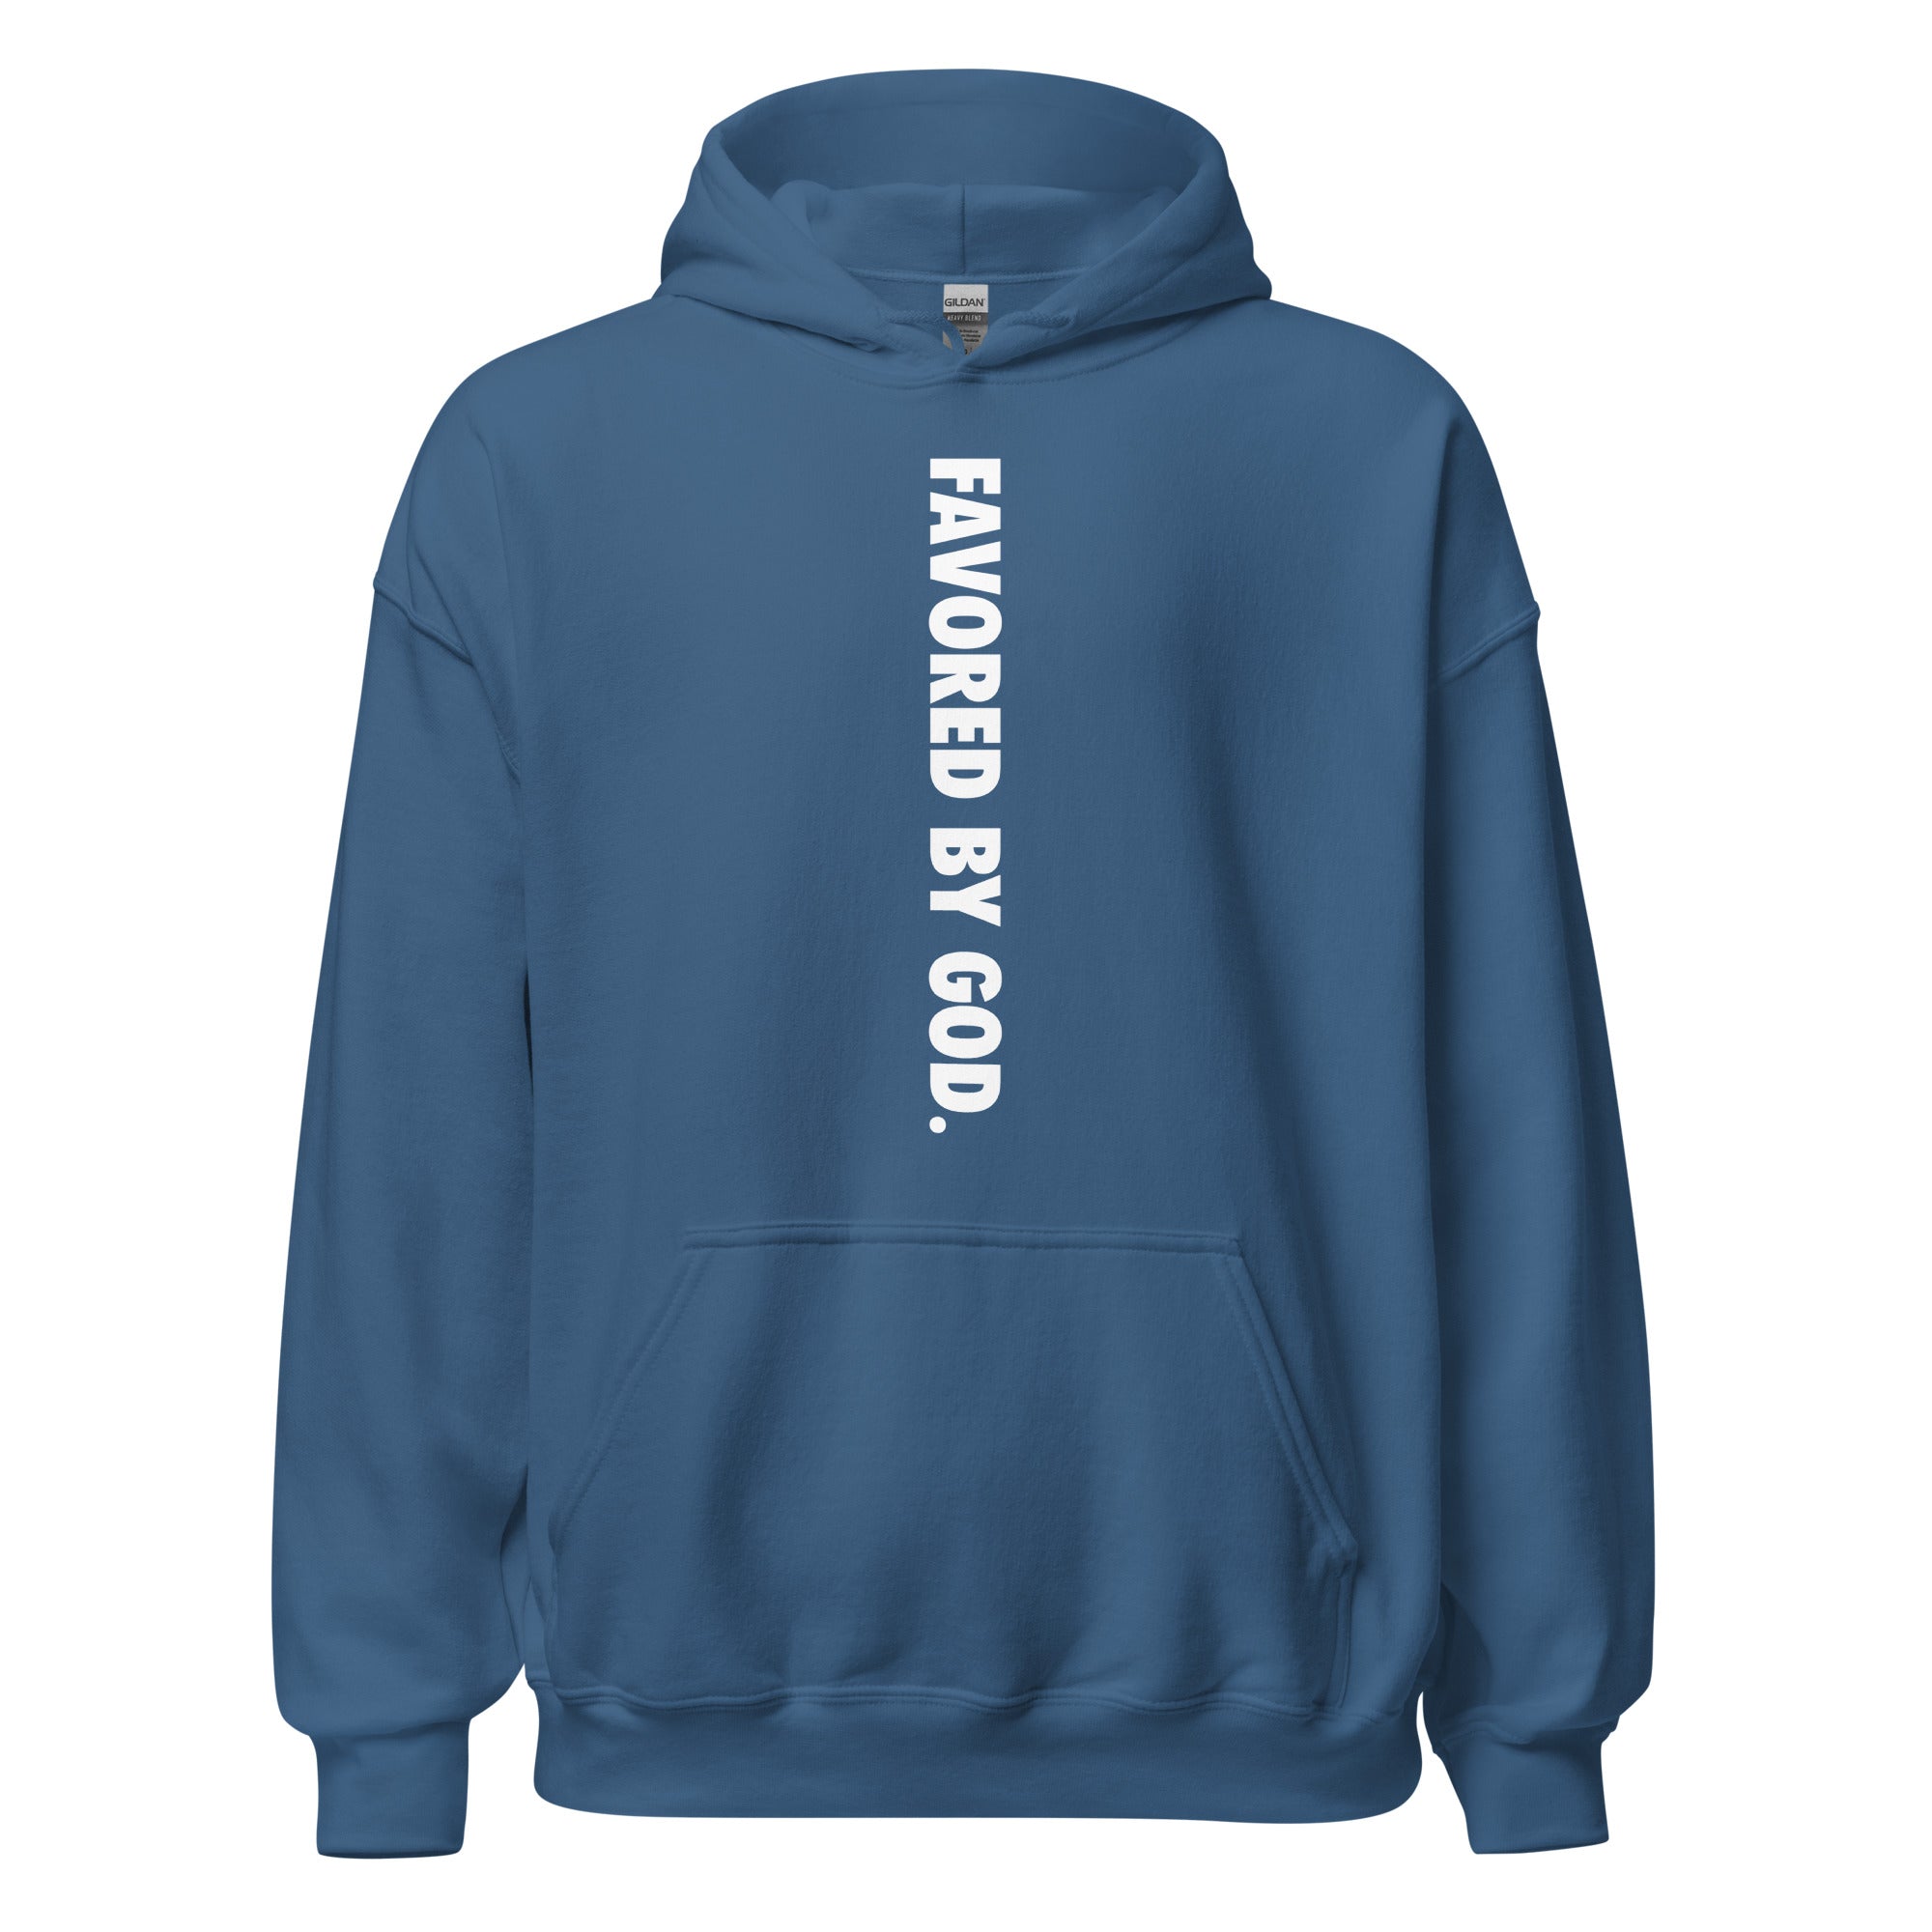 Favored By God Inspired Hoodie